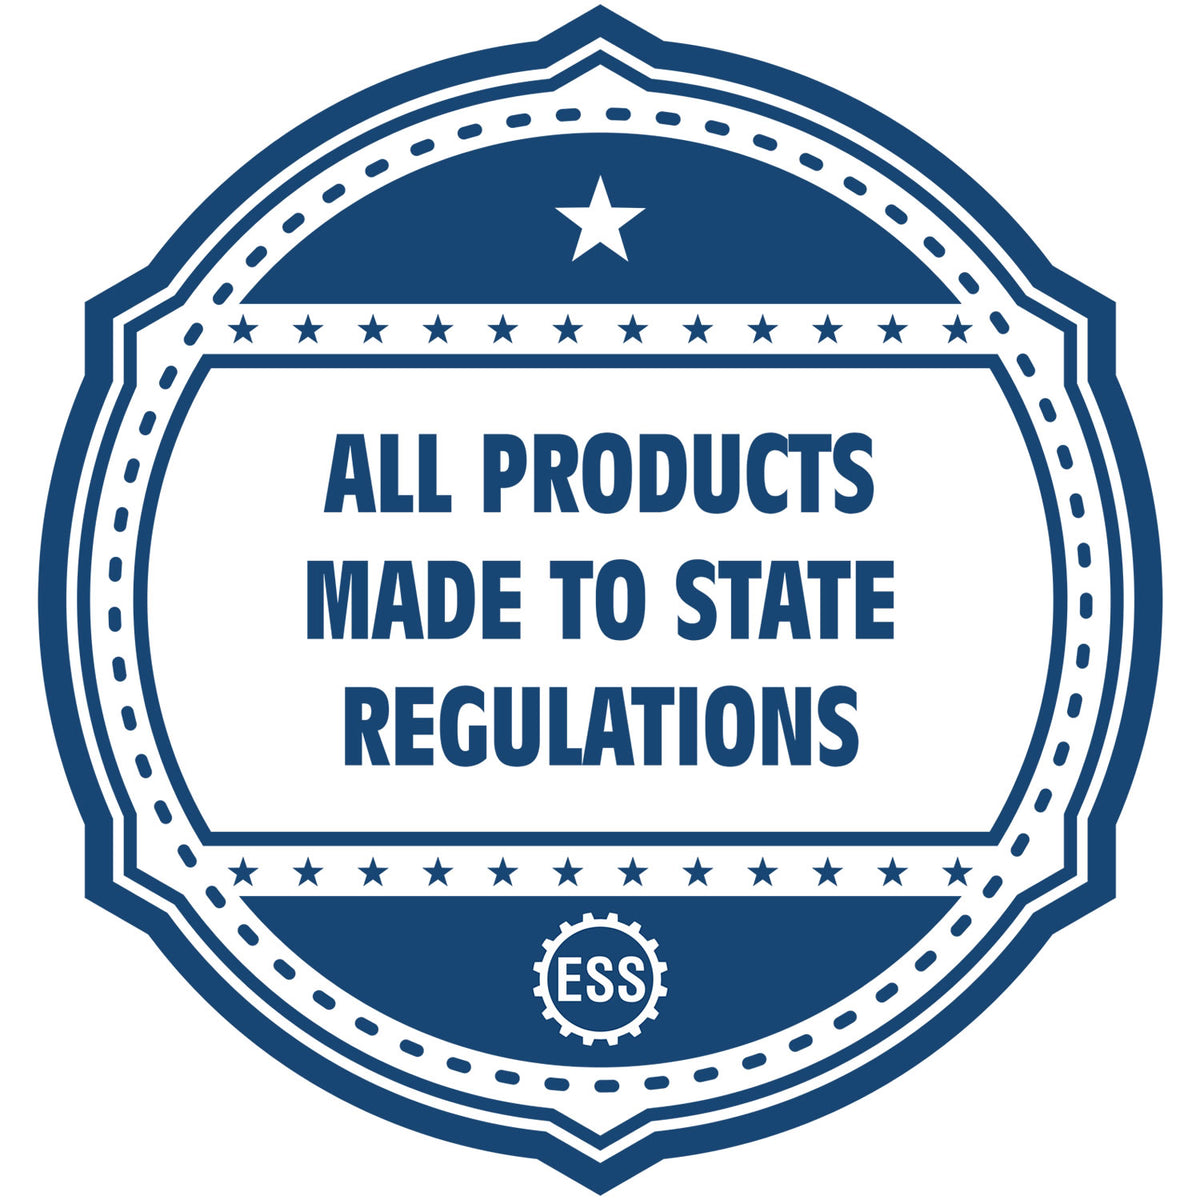 An icon or badge element for the State of Maryland Soft Land Surveyor Embossing Seal showing that this product is made in compliance with state regulations.